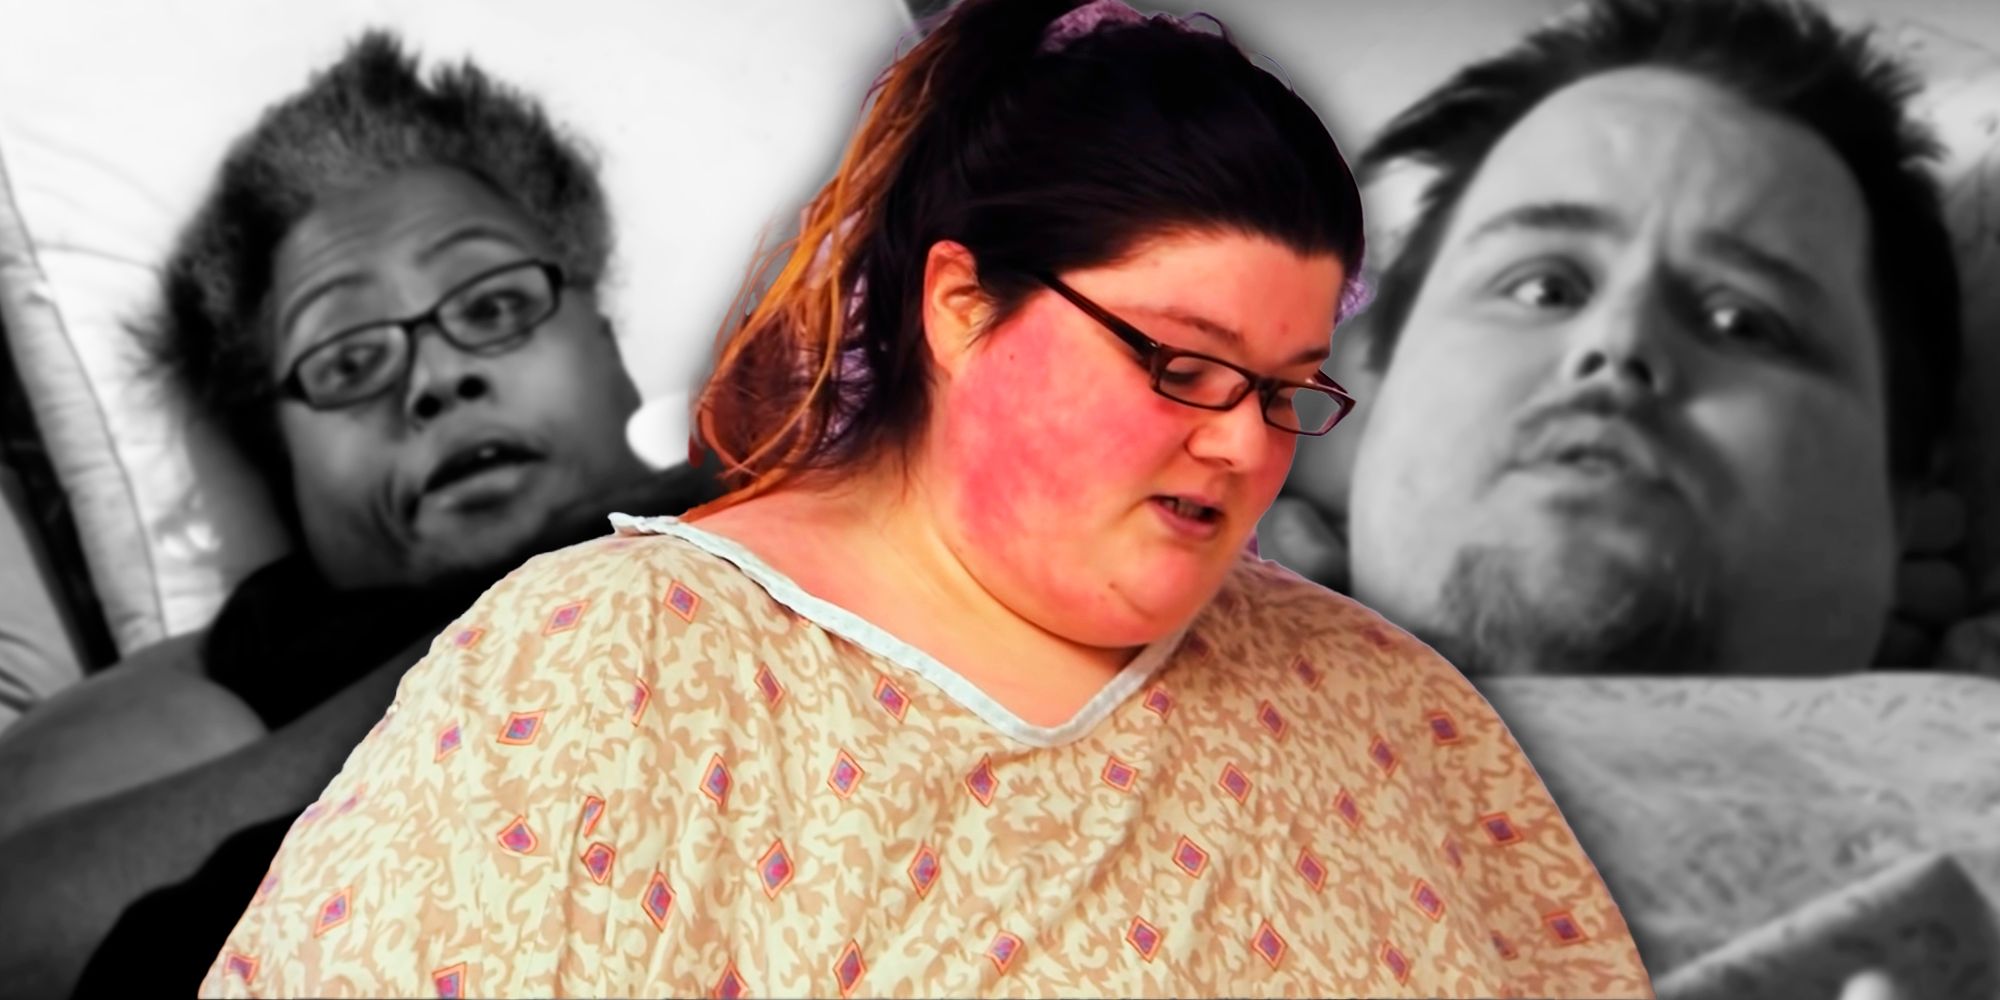 montage of Gina, Lisa and James from My 600-lb Life